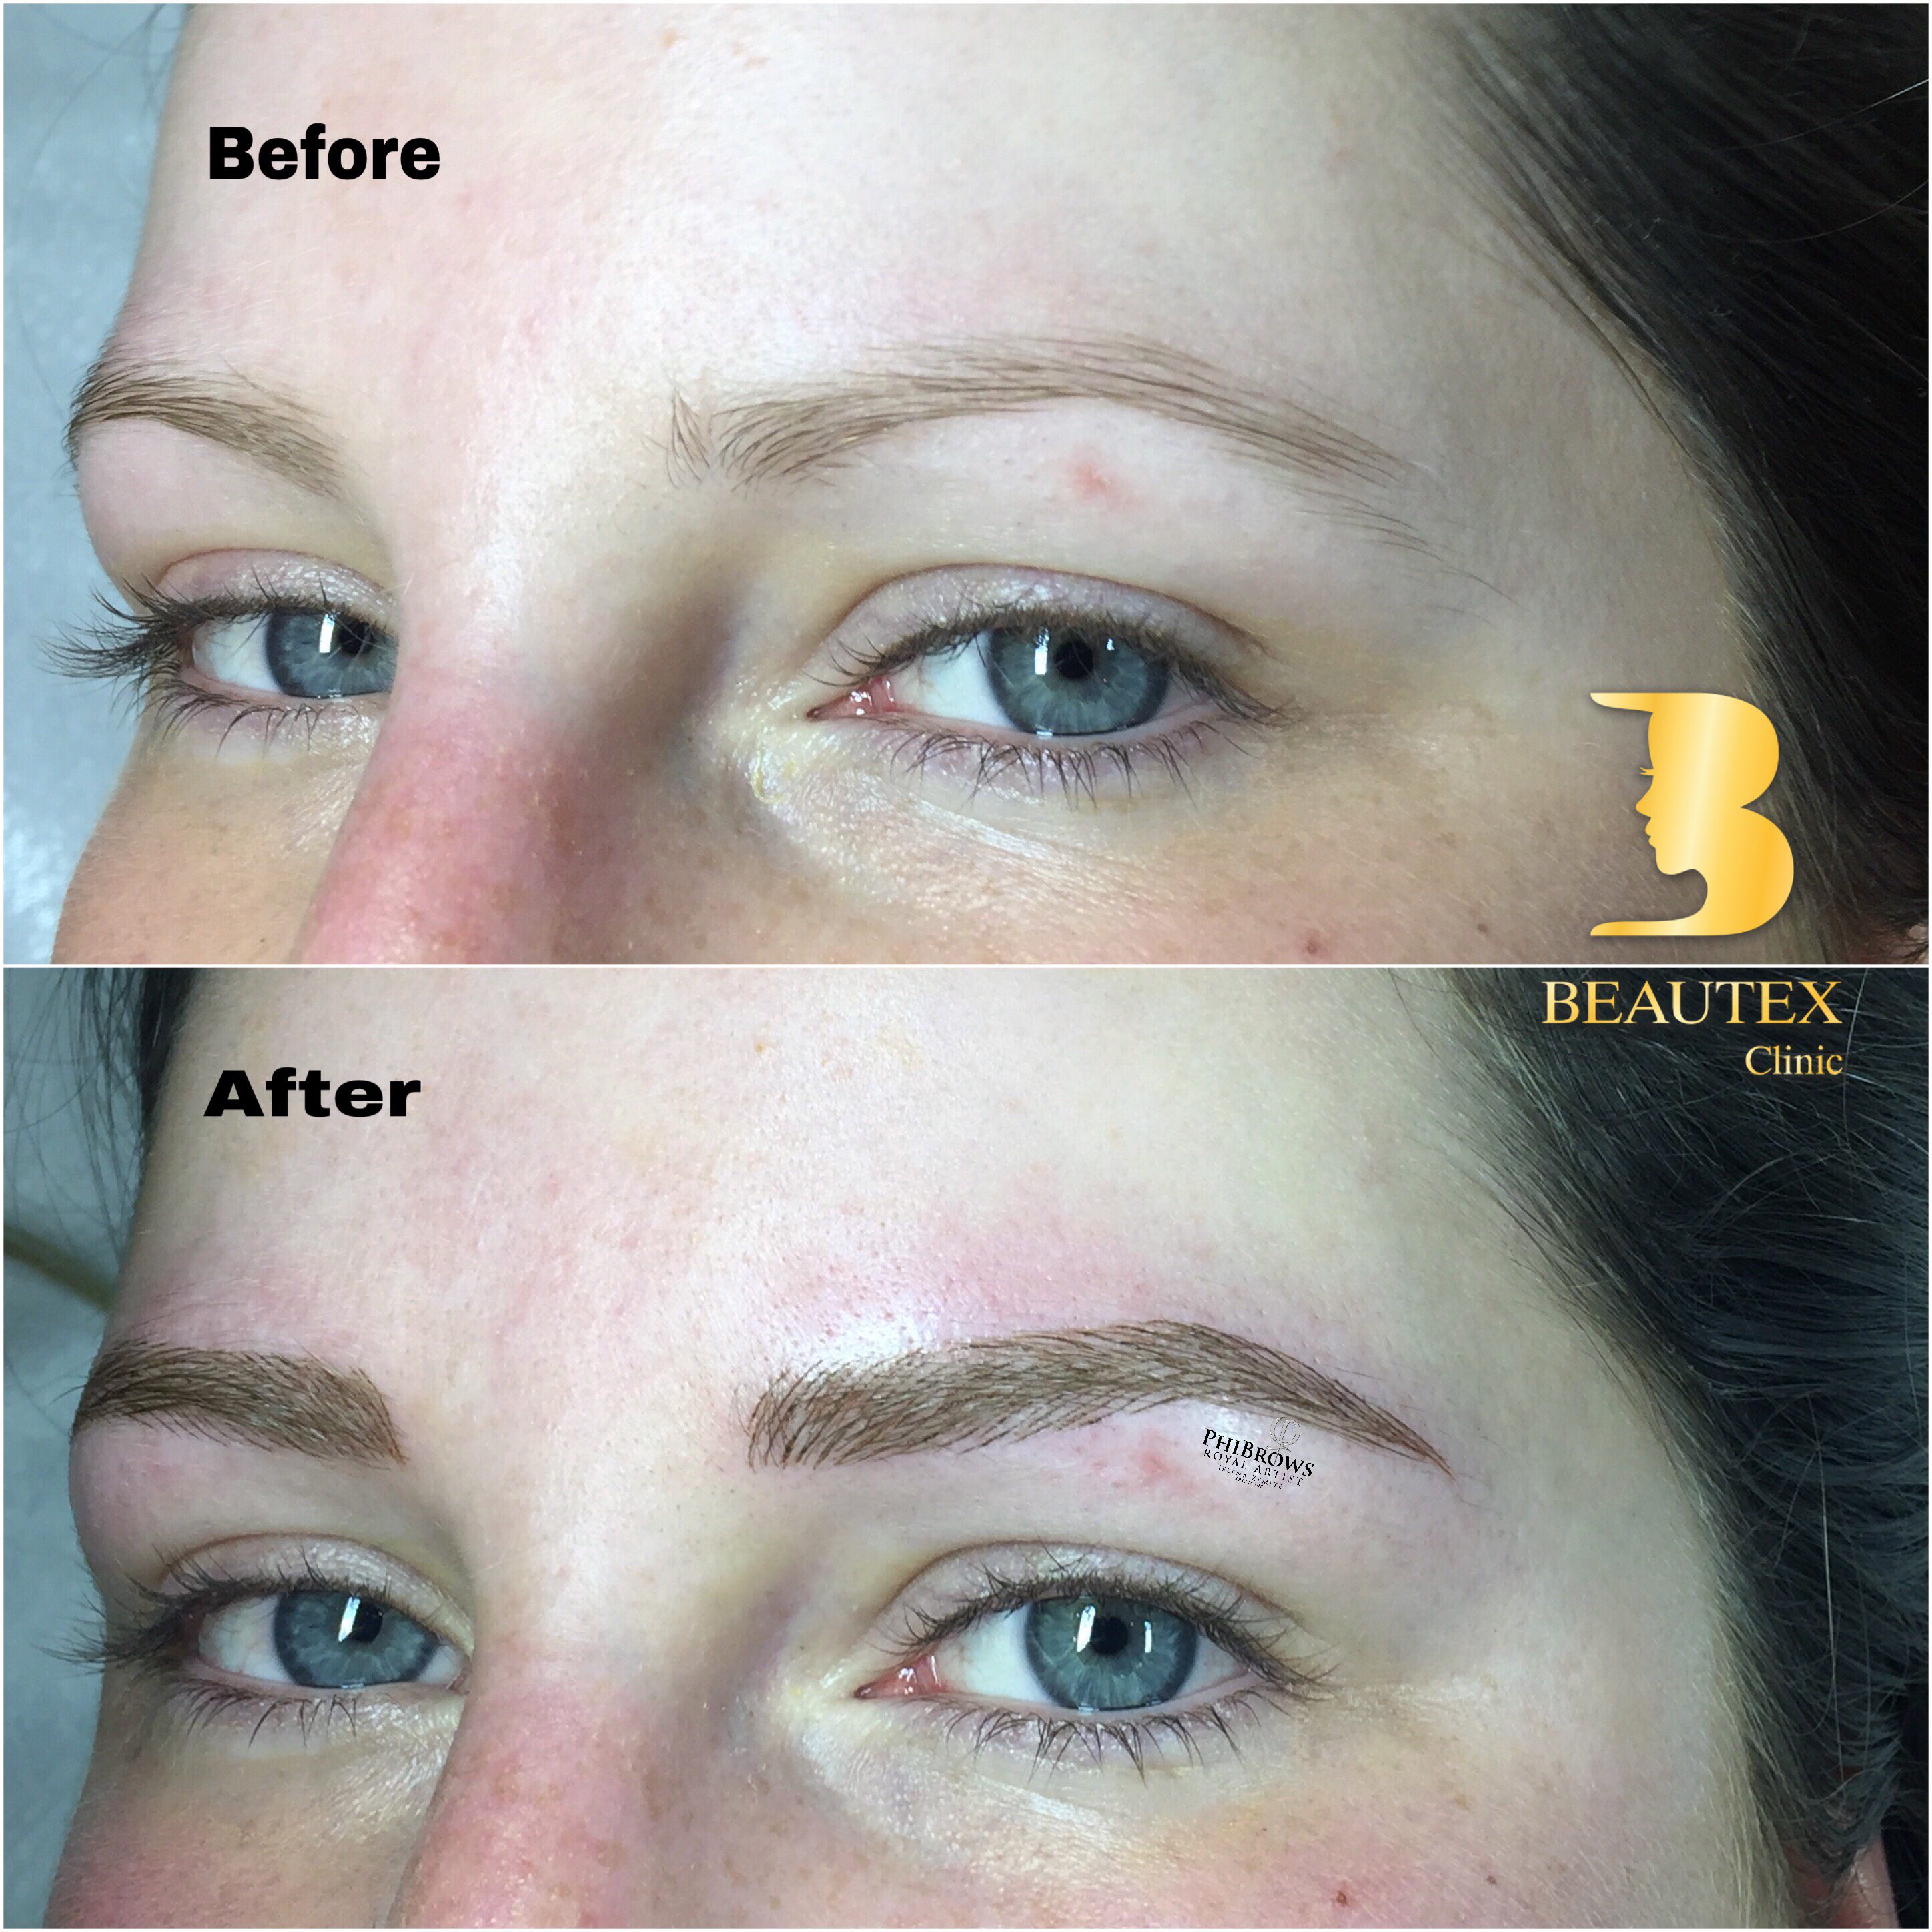 A woman's eyebrows before and after treatment.